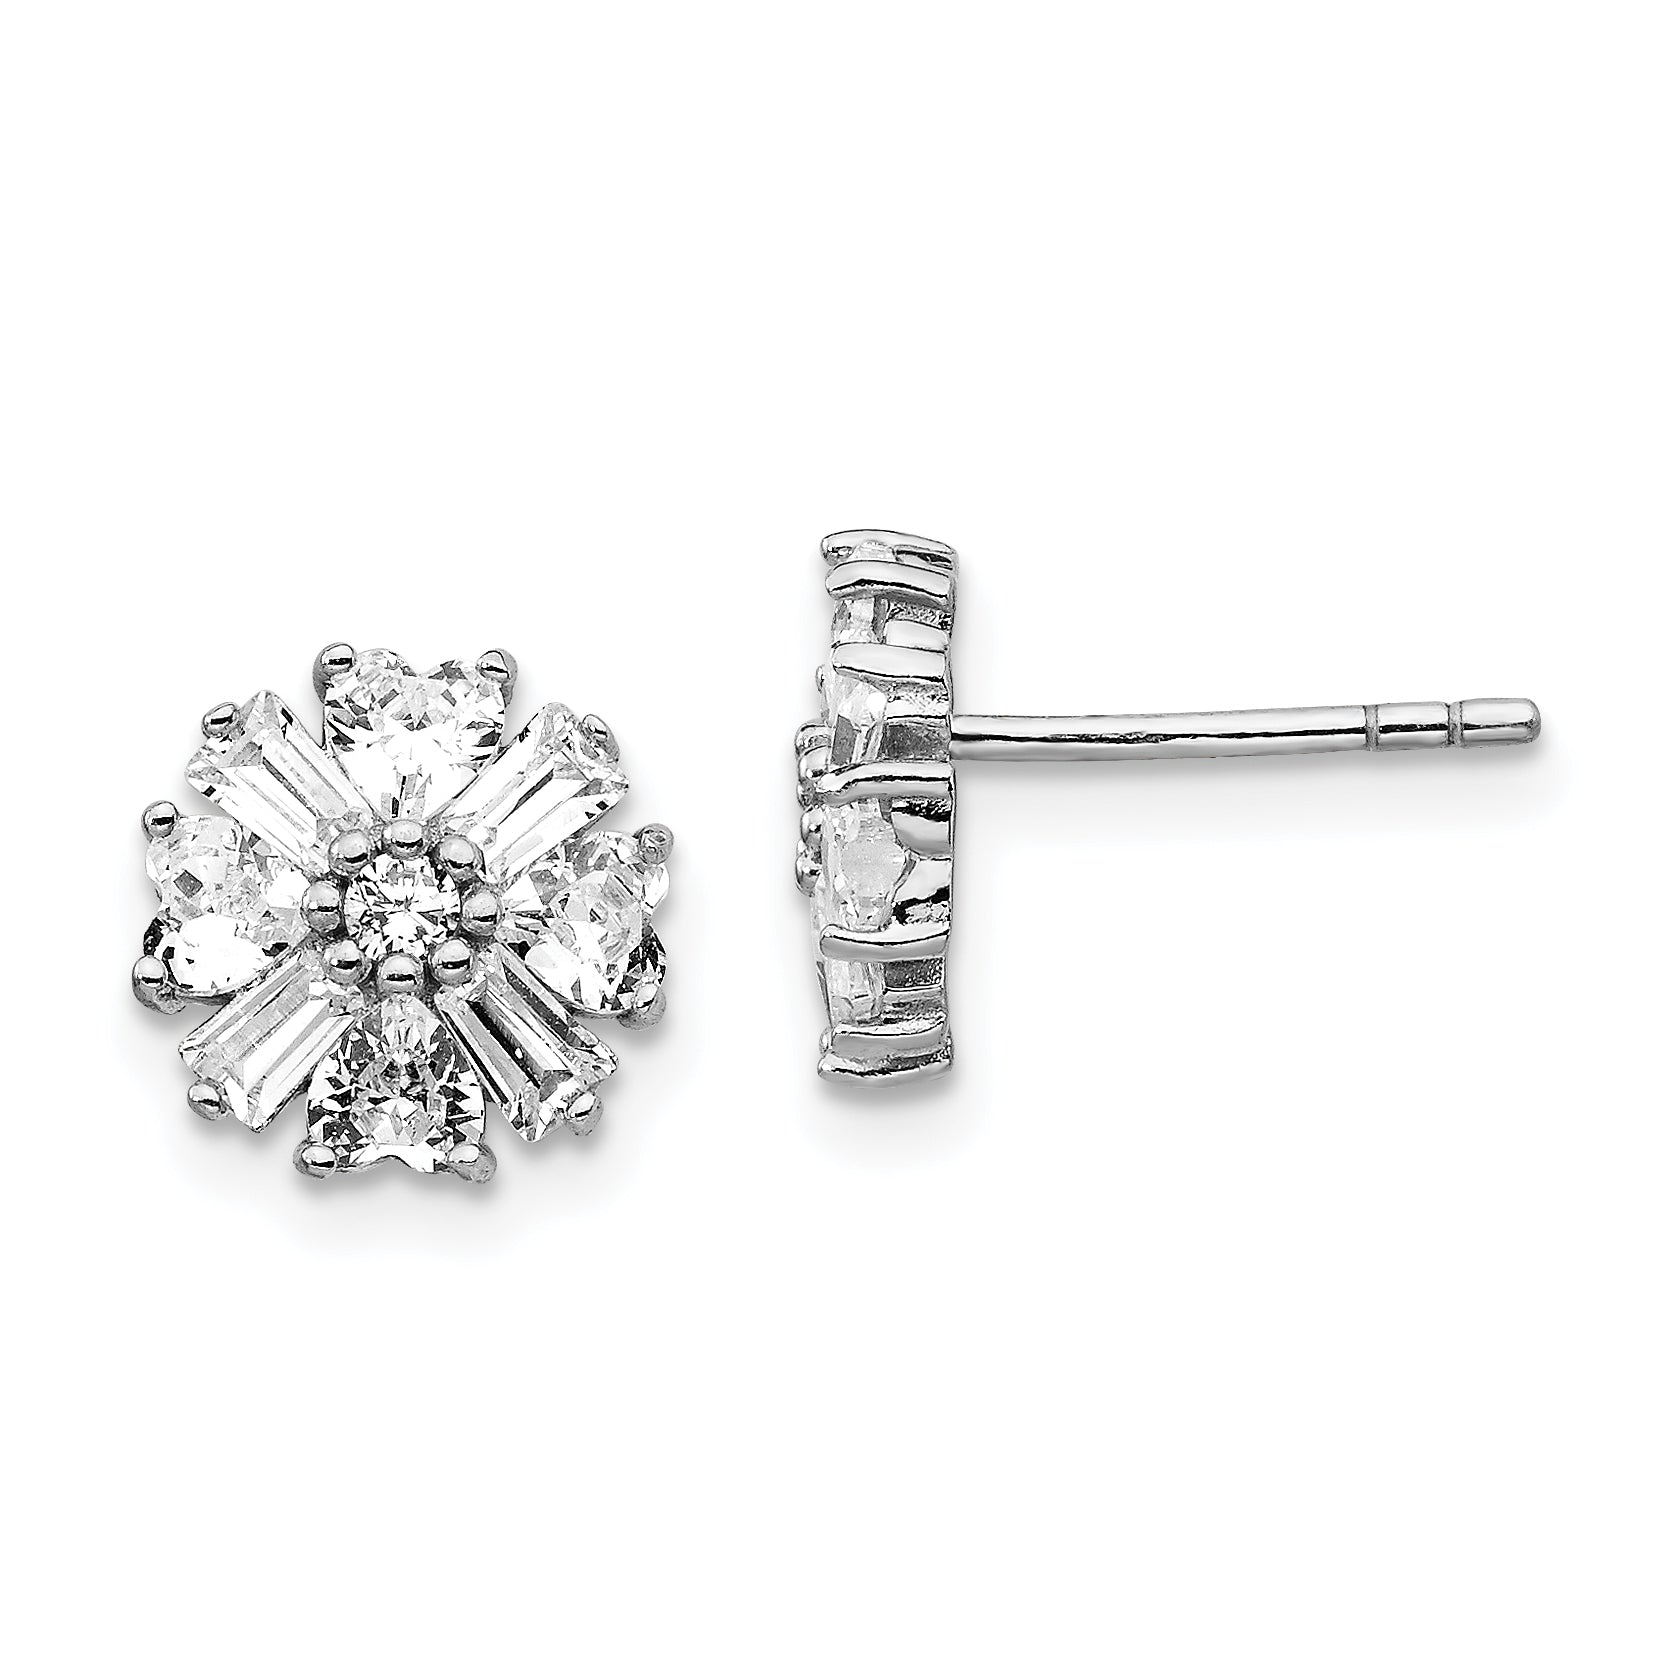 Cheryl M Sterling Silver Rhodium-plated Emerald-cut and Brilliant-cut CZ Cluster Post Earrings